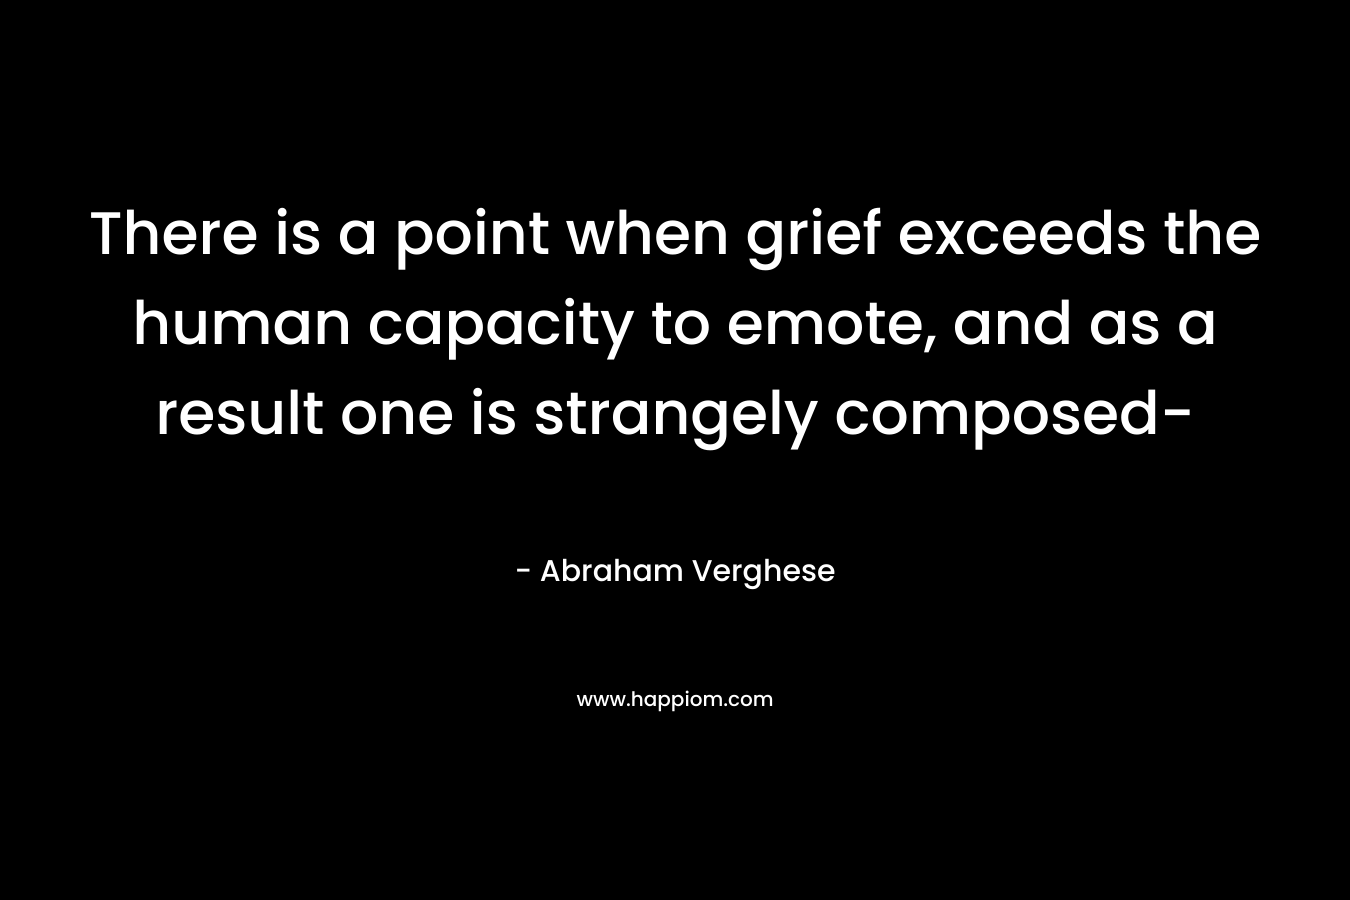 There is a point when grief exceeds the human capacity to emote, and as a result one is strangely composed- – Abraham Verghese